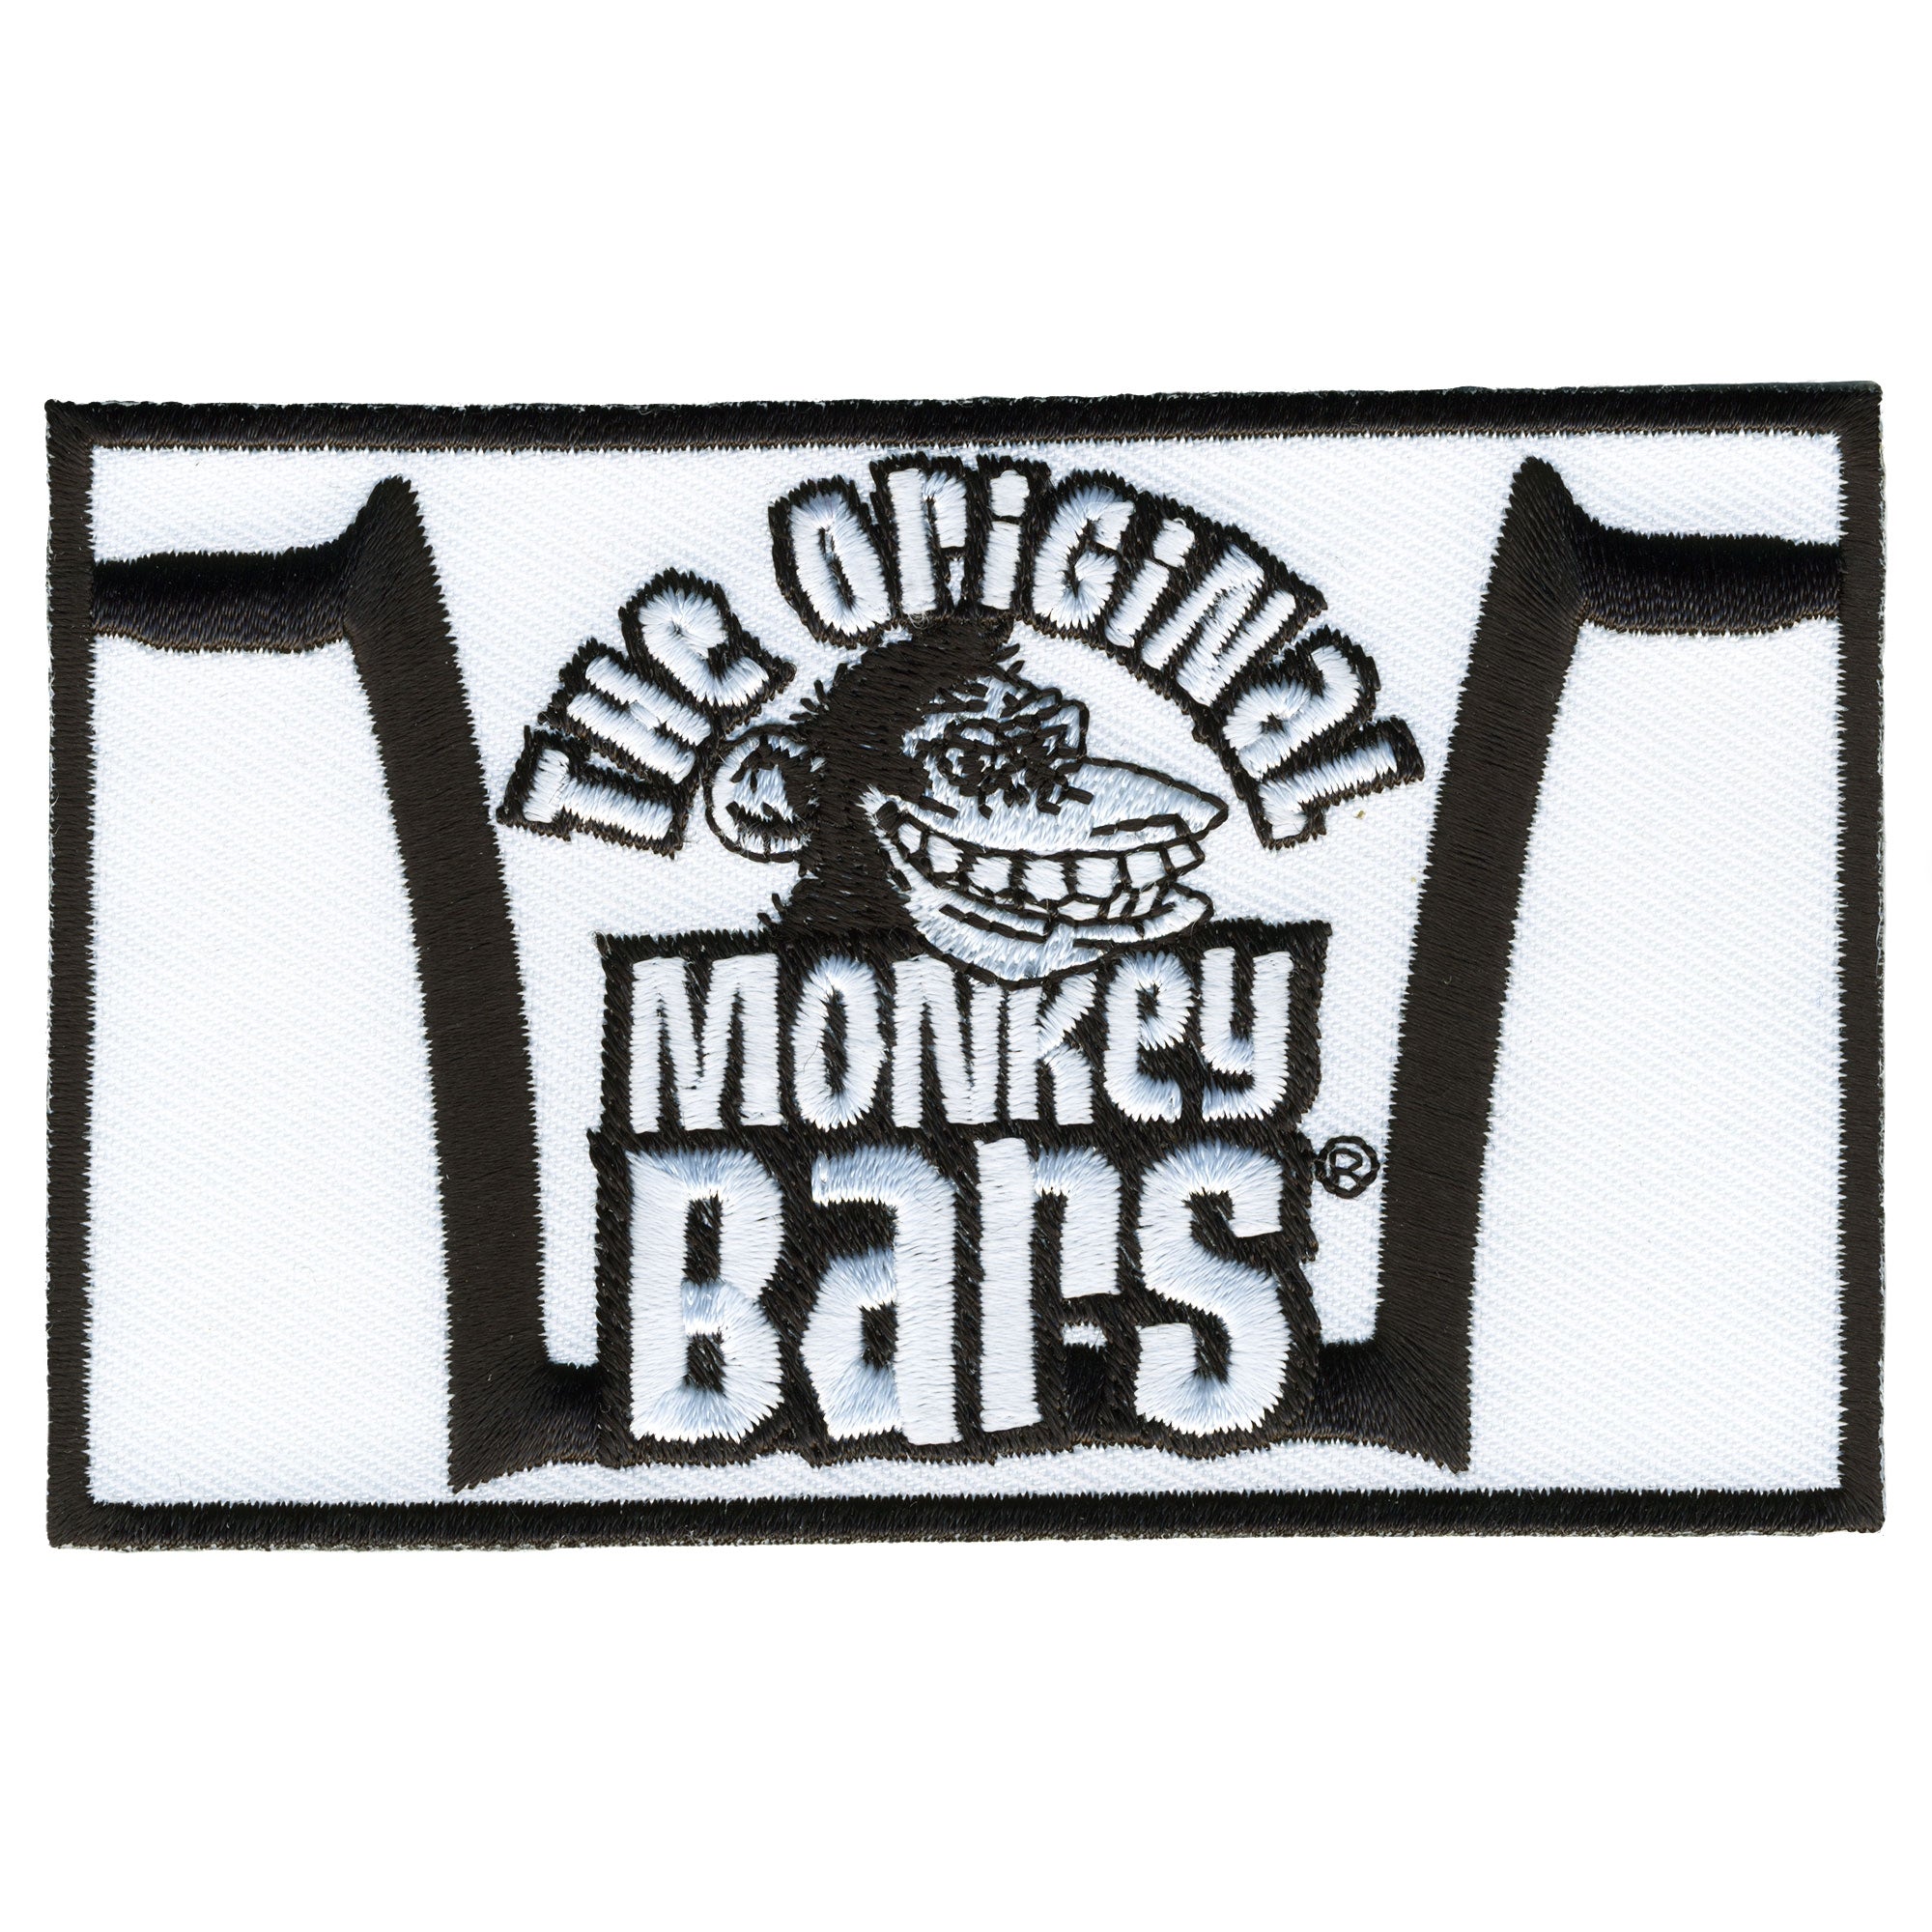 Hot Leathers PYA1020 Official Paul Yaffe's Bagger Nation Monkey Bars 4"X2.5" Patch